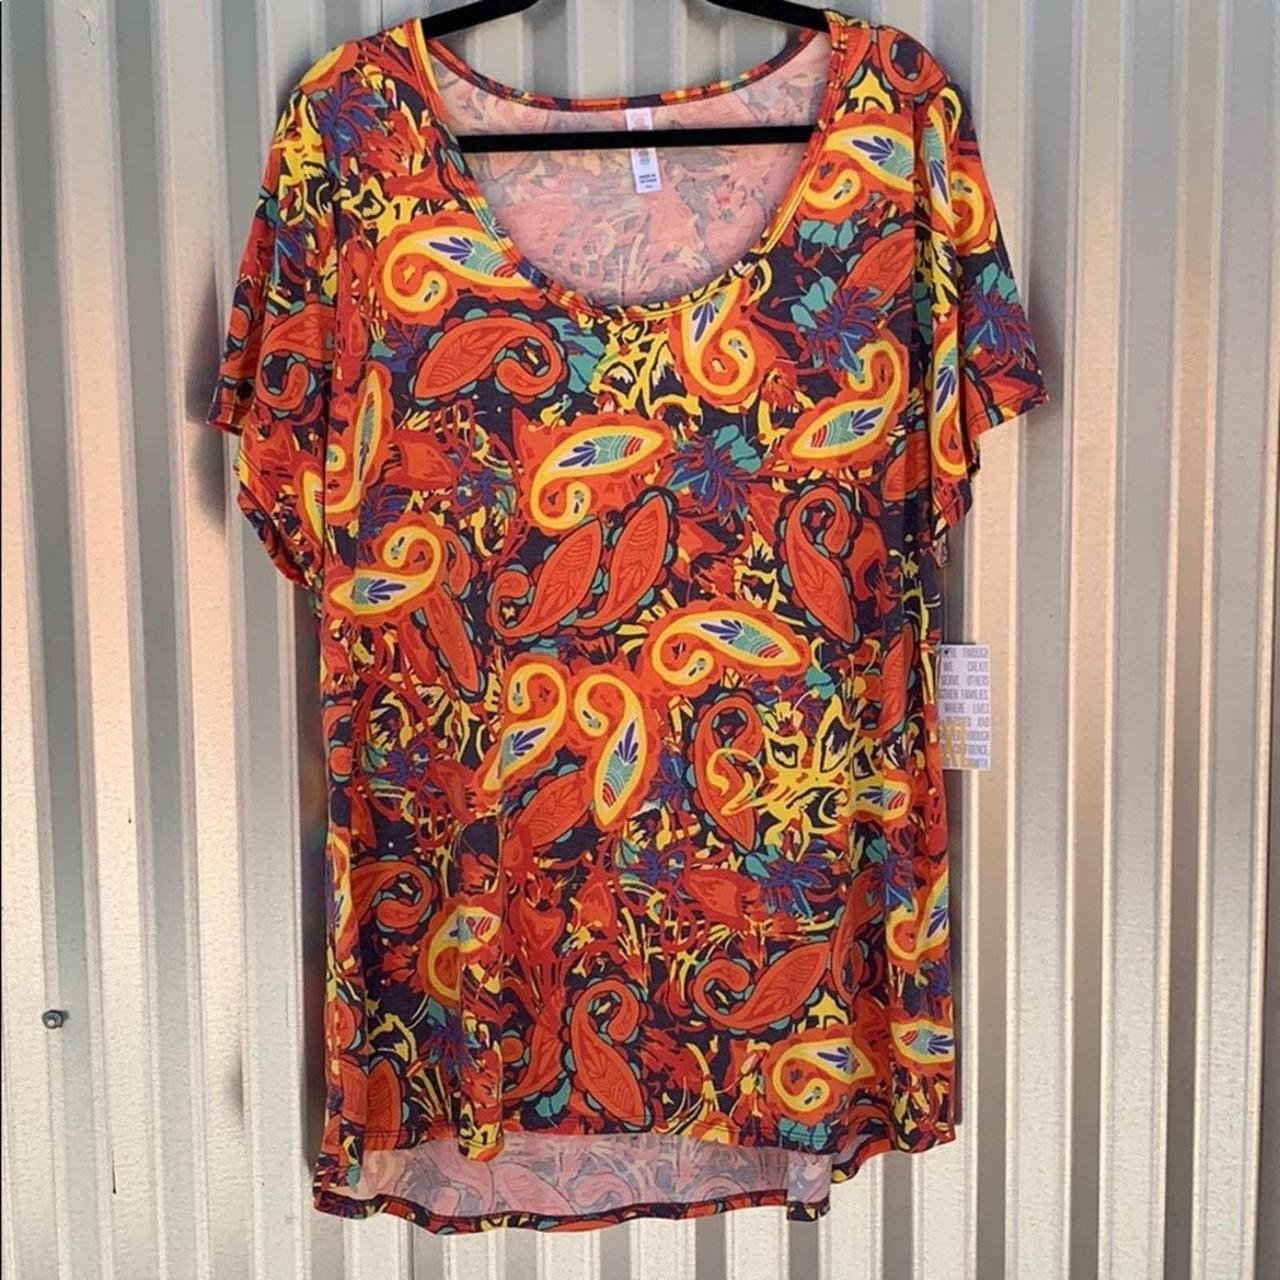 Lularoe classic tee shirt. New with tags. Size 3XL. - Depop